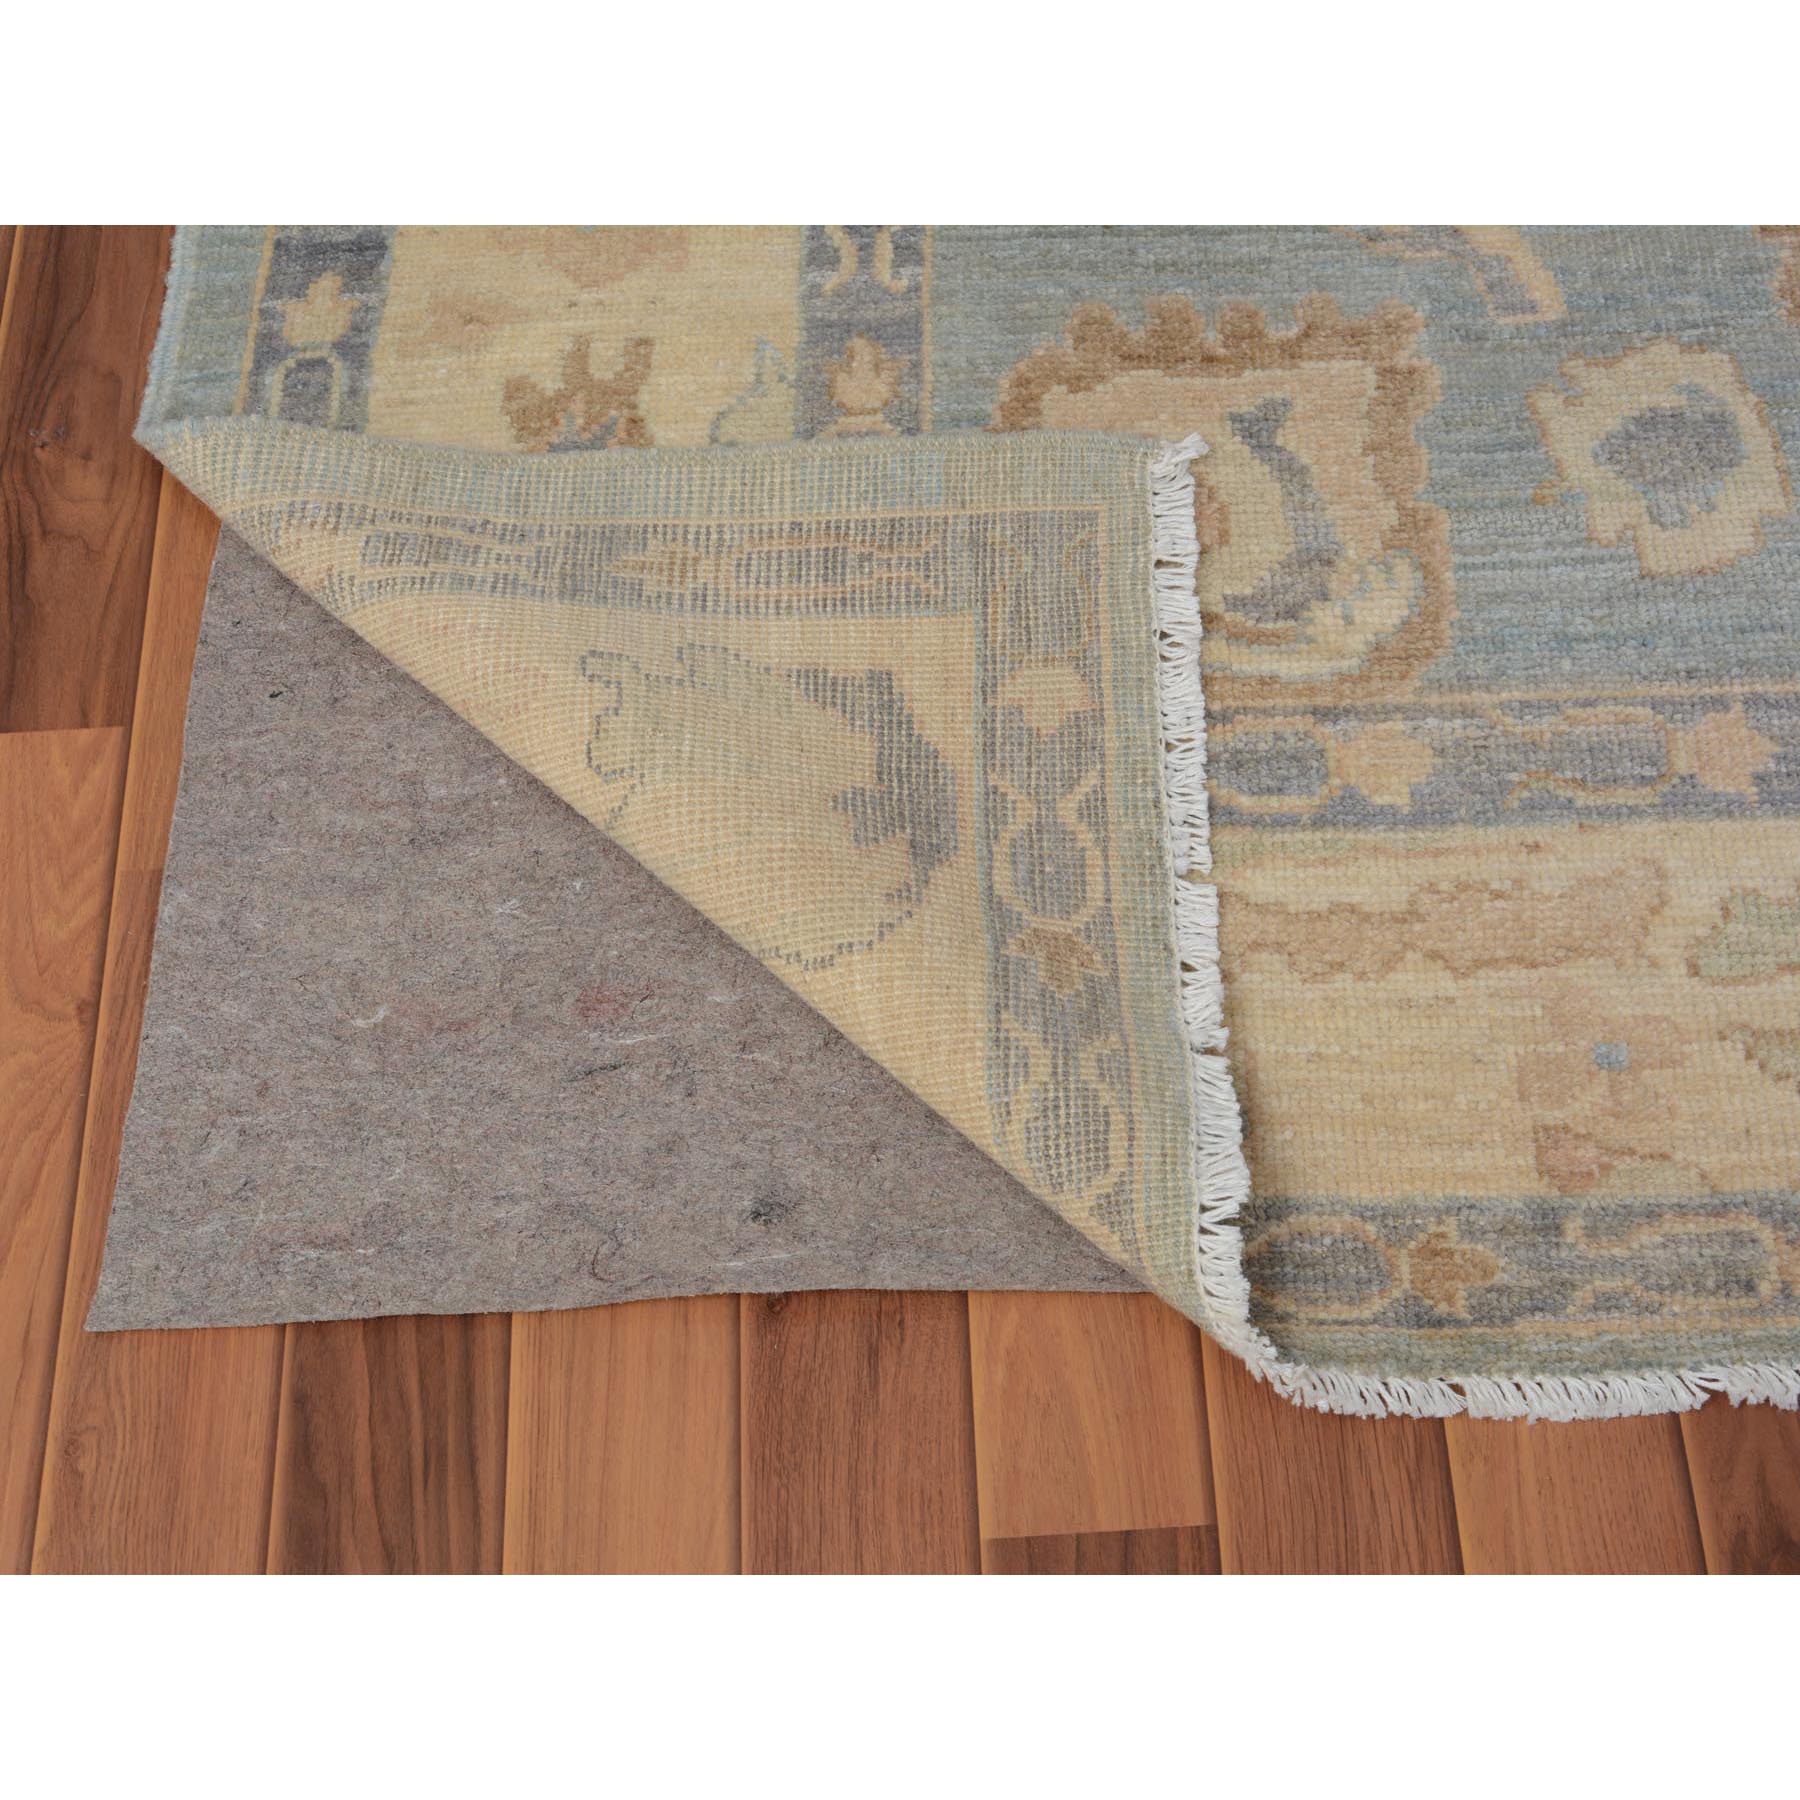 6-2 x8-10  Gray Angora Oushak With Soft Velvety Wool Hand Knotted Oriental Rug 